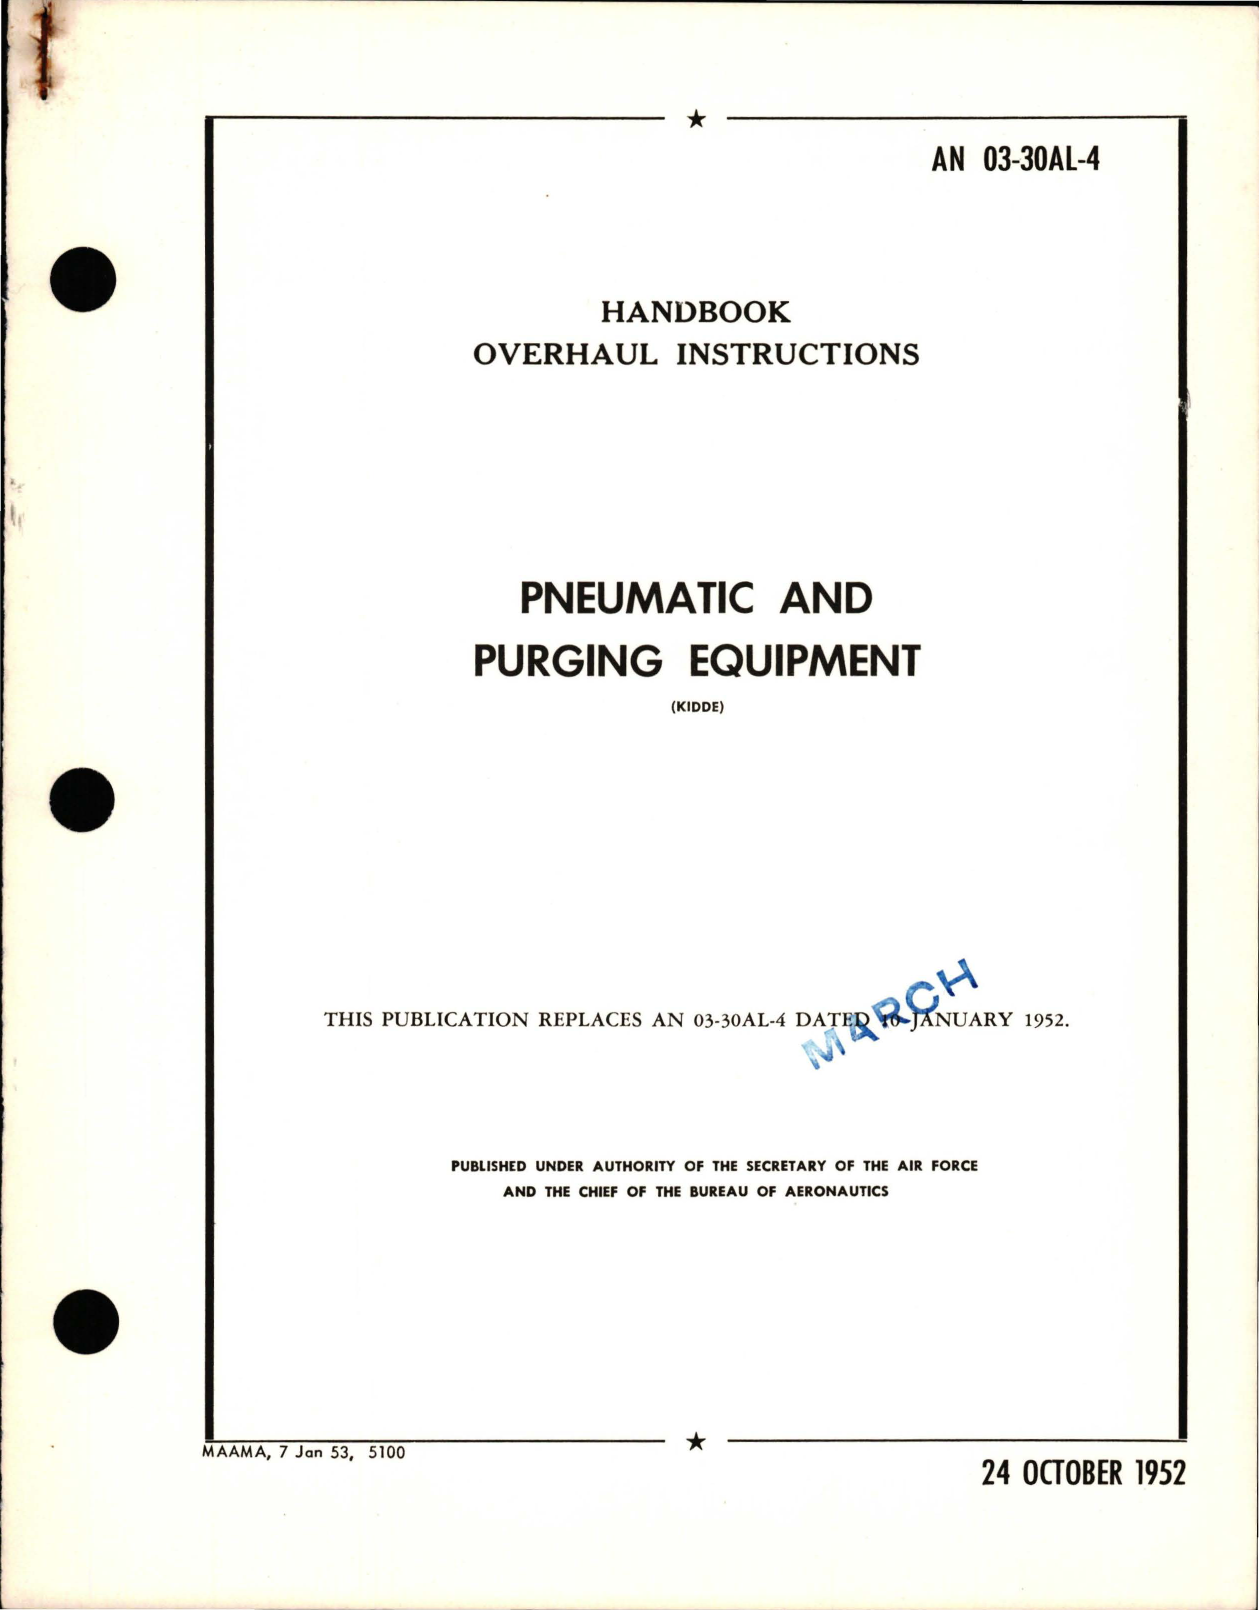 Sample page 1 from AirCorps Library document: Overhaul Instructions for Pneumatic and Purging Equipment